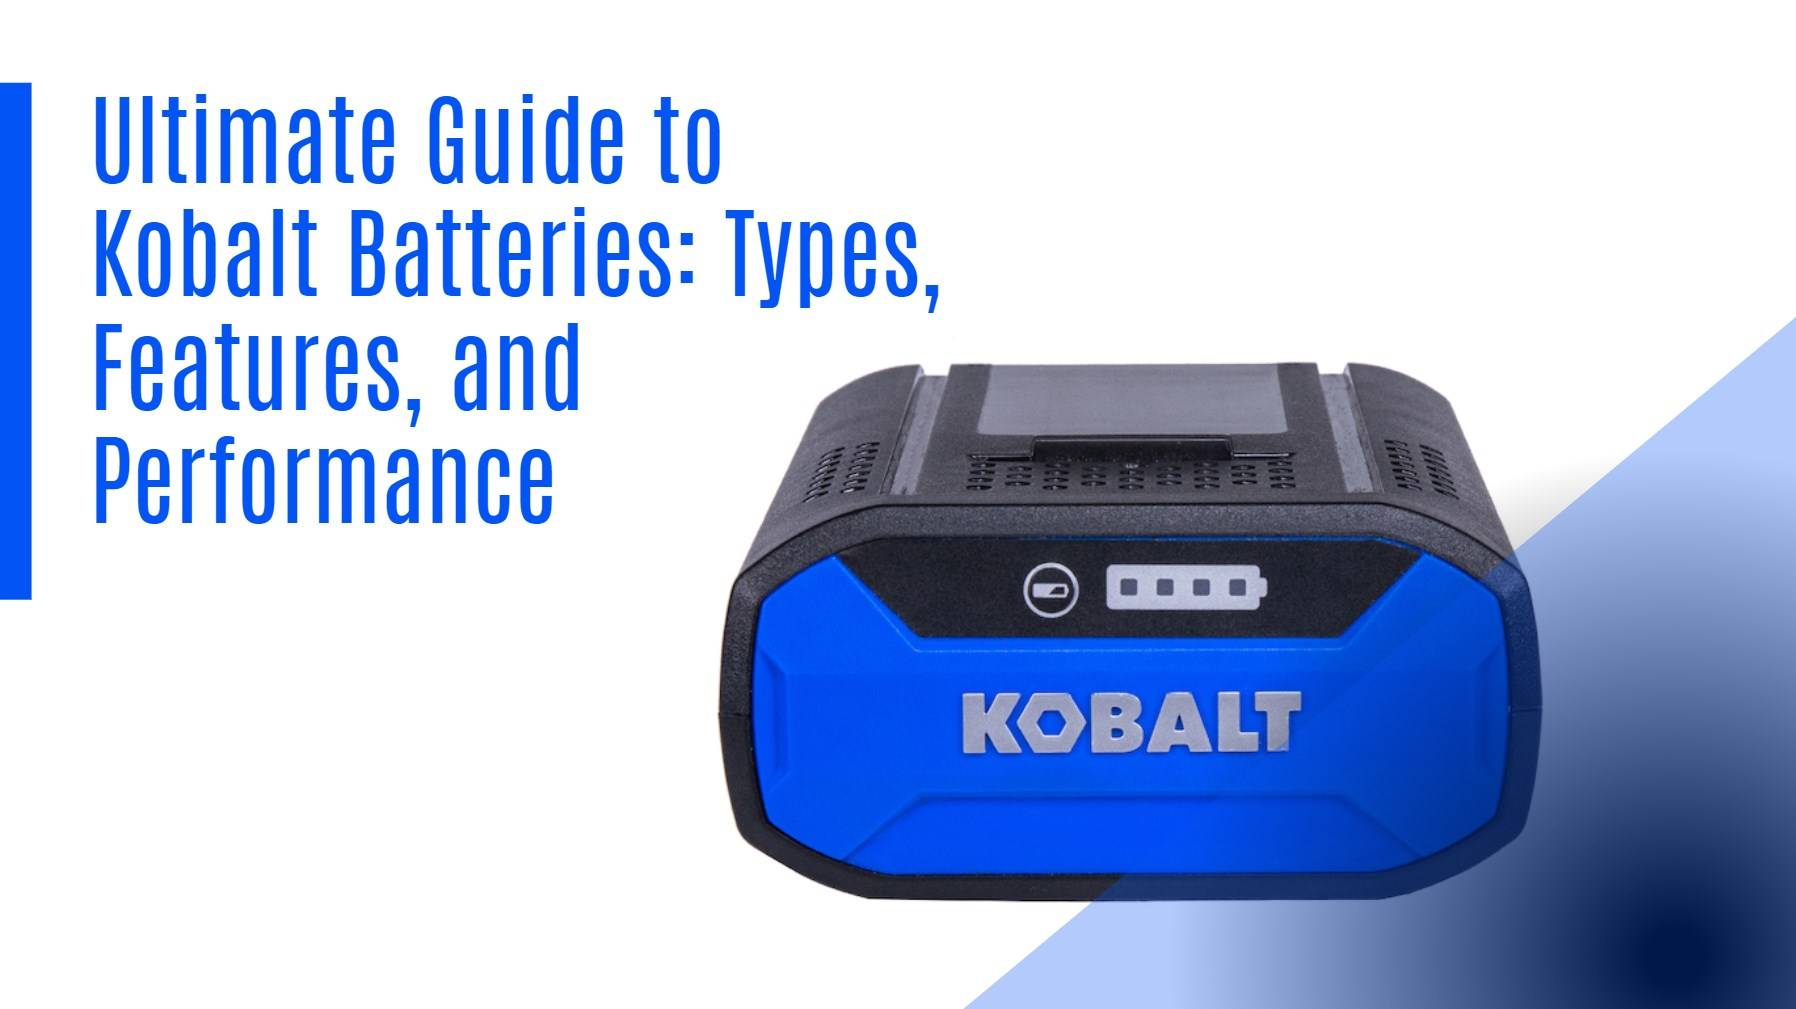 Ultimate Guide to Kobalt Batteries: Types, Features, and Performance